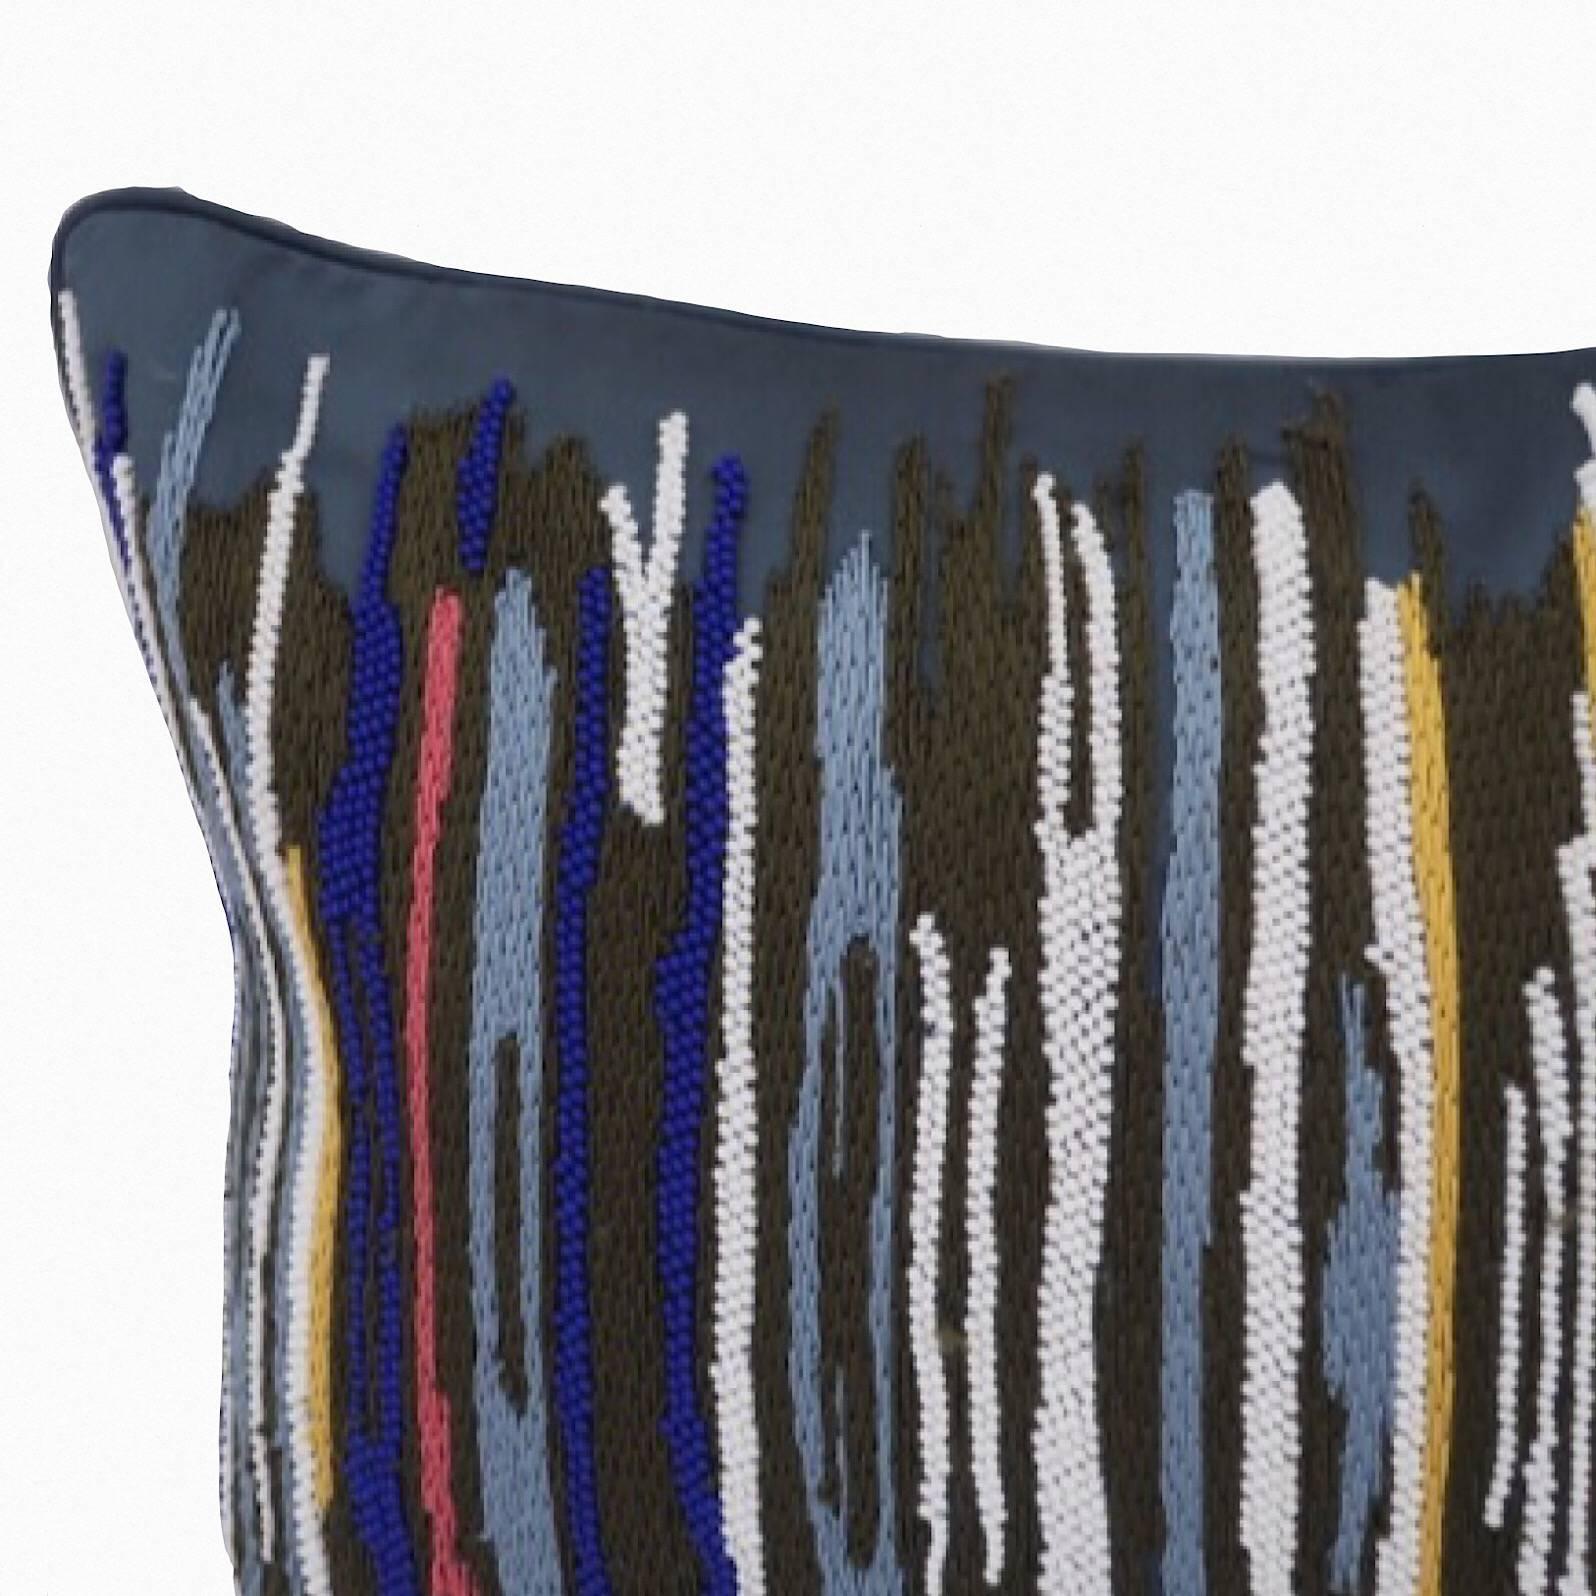 Hand embroidered pillow.
Handcrafted using Matt beads and cotton yarn embroidered in multicolored stripes on a blue background.
Satin fabric,self zip and feather pads.